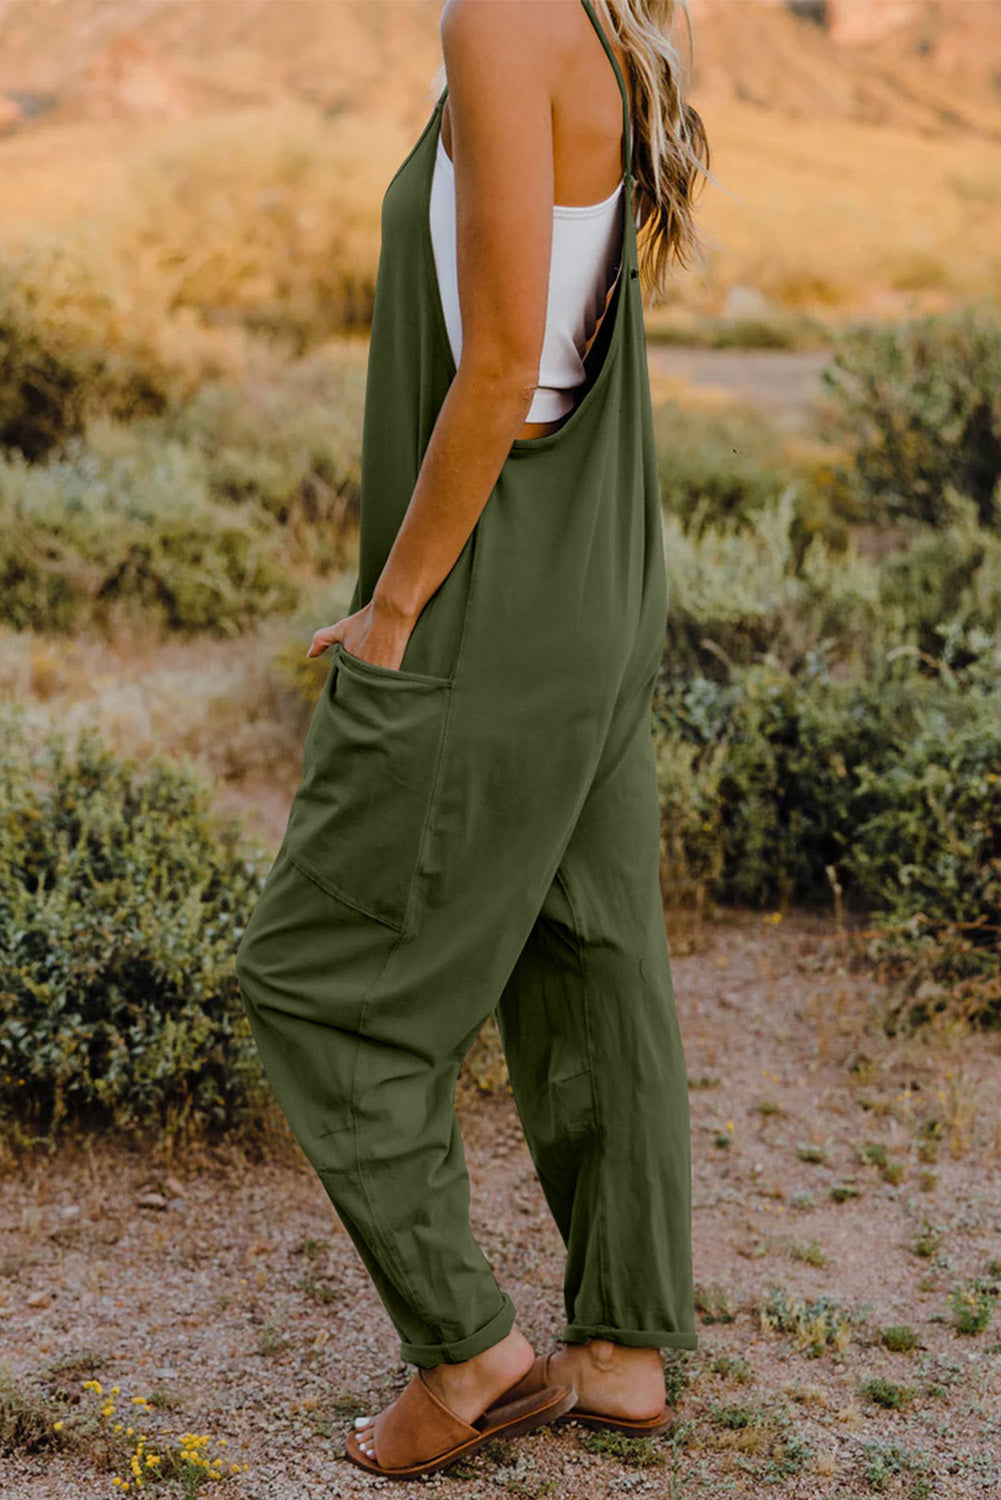 V-Neck Sleeveless Jumpsuit with Pocket Print on any thing USA/STOD clothes